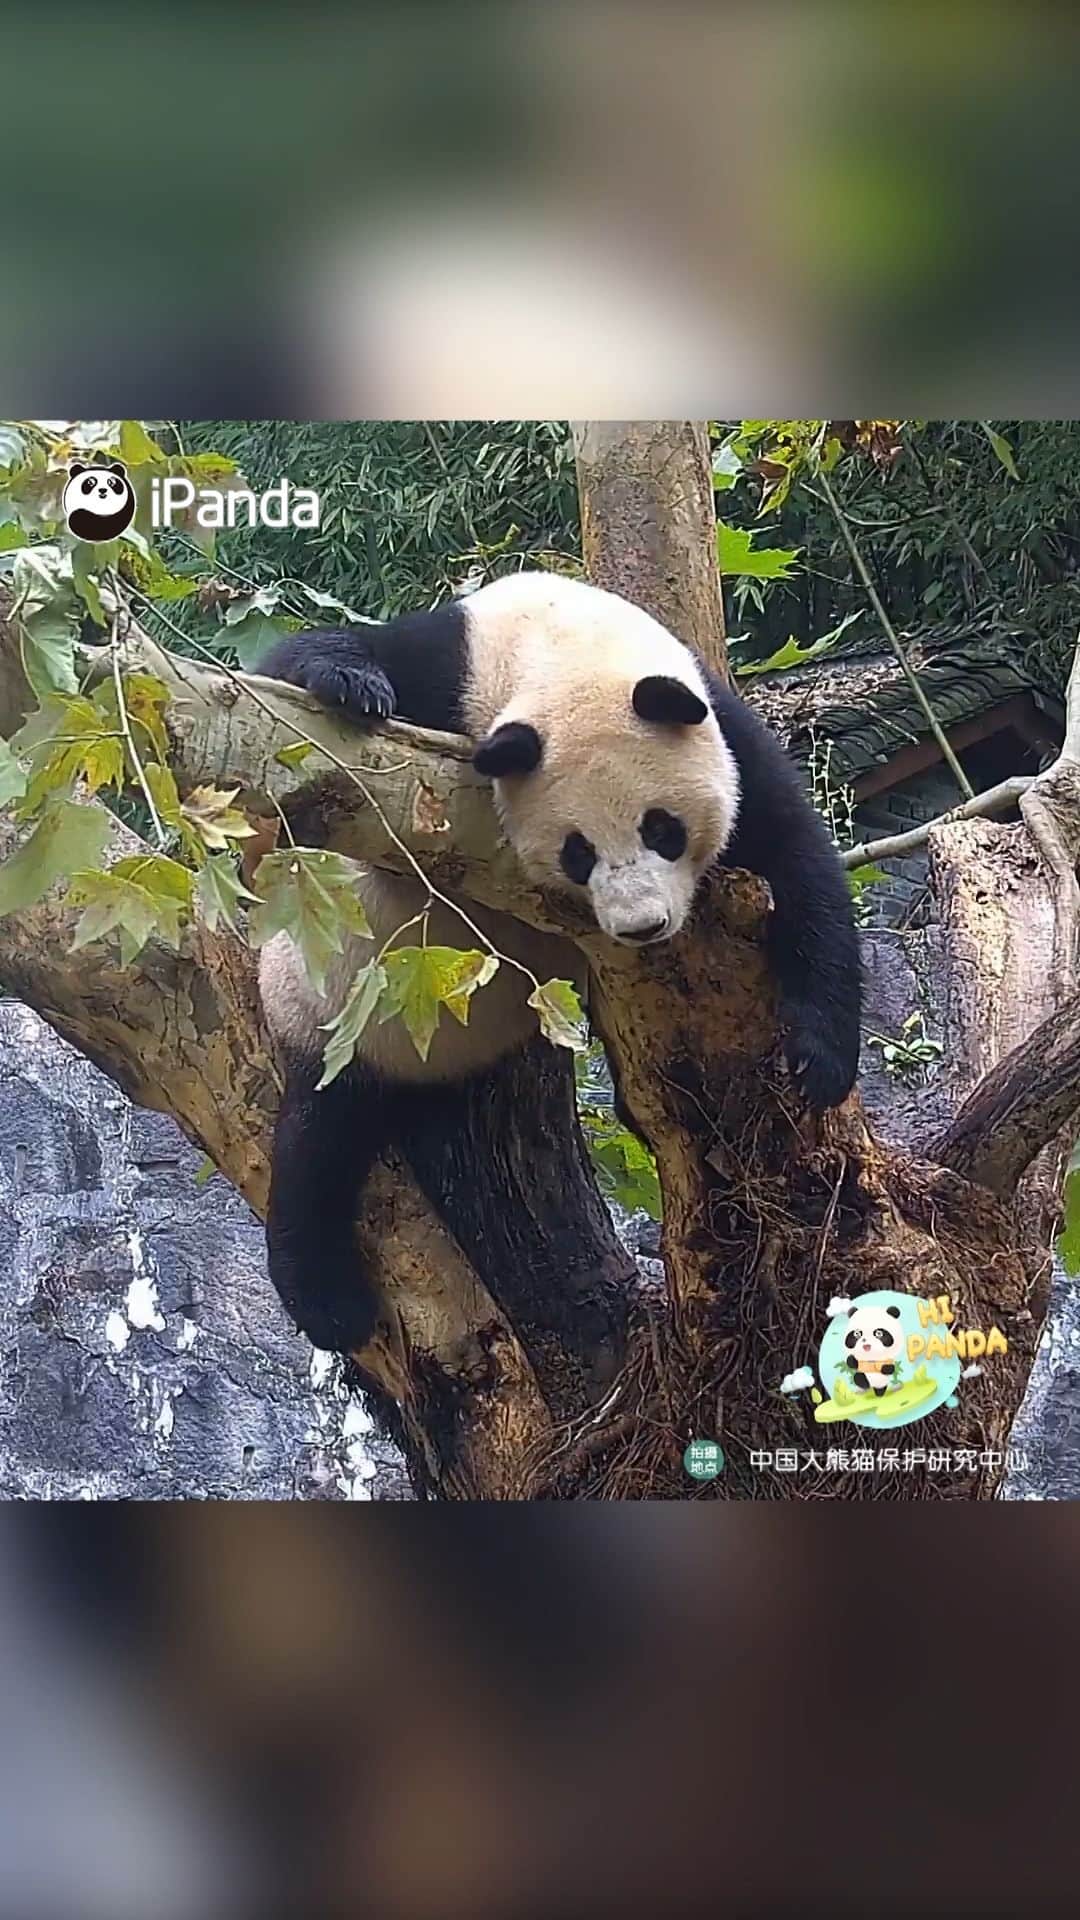 iPandaのインスタグラム：「Who forgot to take back the XL panda suit hanging on the tree? Please go to the lost and found office to collect it~ 🐼 🐼 🐼 #Panda #iPanda #Cute #HiPanda #CCRCGP #PandaMoment  For more panda information, please check out: https://en.ipanda.com」